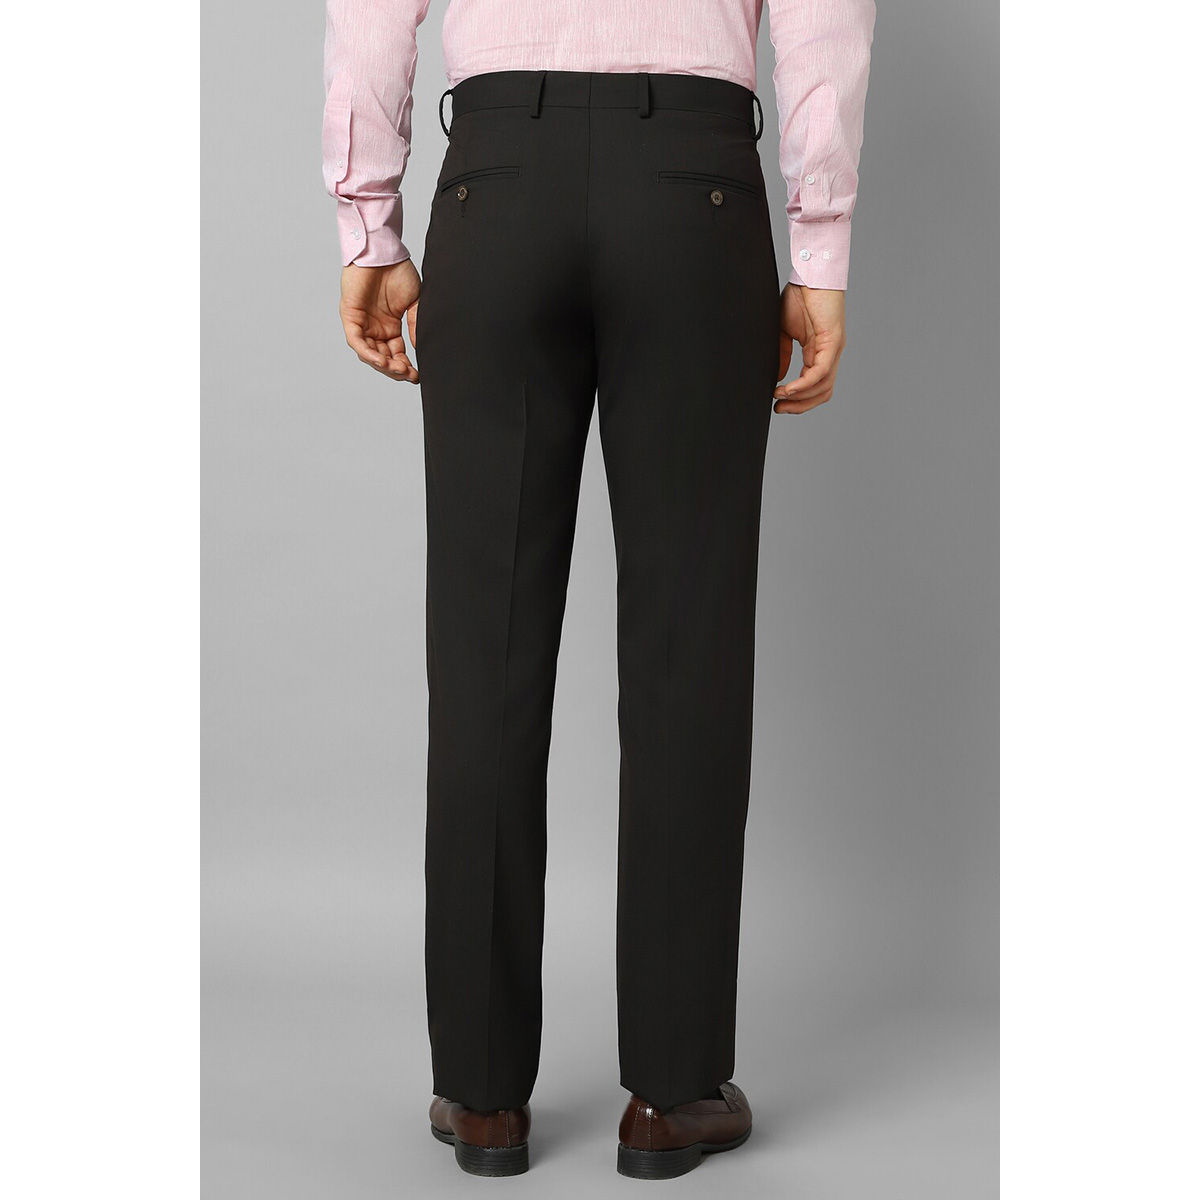 Buy Louis Philippe Men Blue Regular Fit Solid Pleated Formal Trousers online